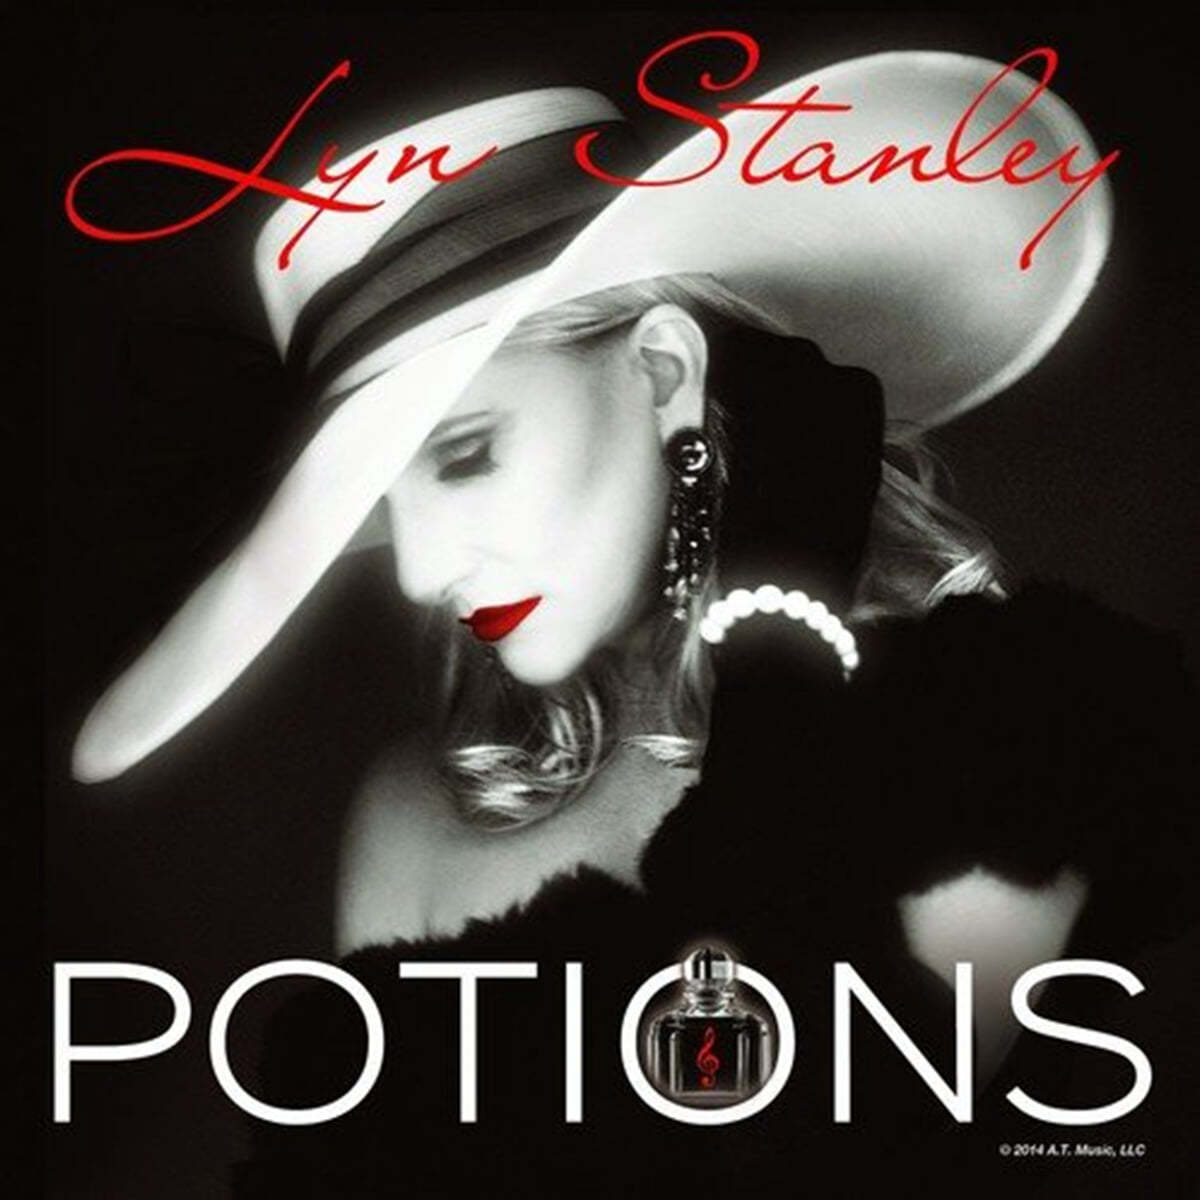 Lyn Stanley (린 스탠리) - Potions (From The 50's) [2LP] 